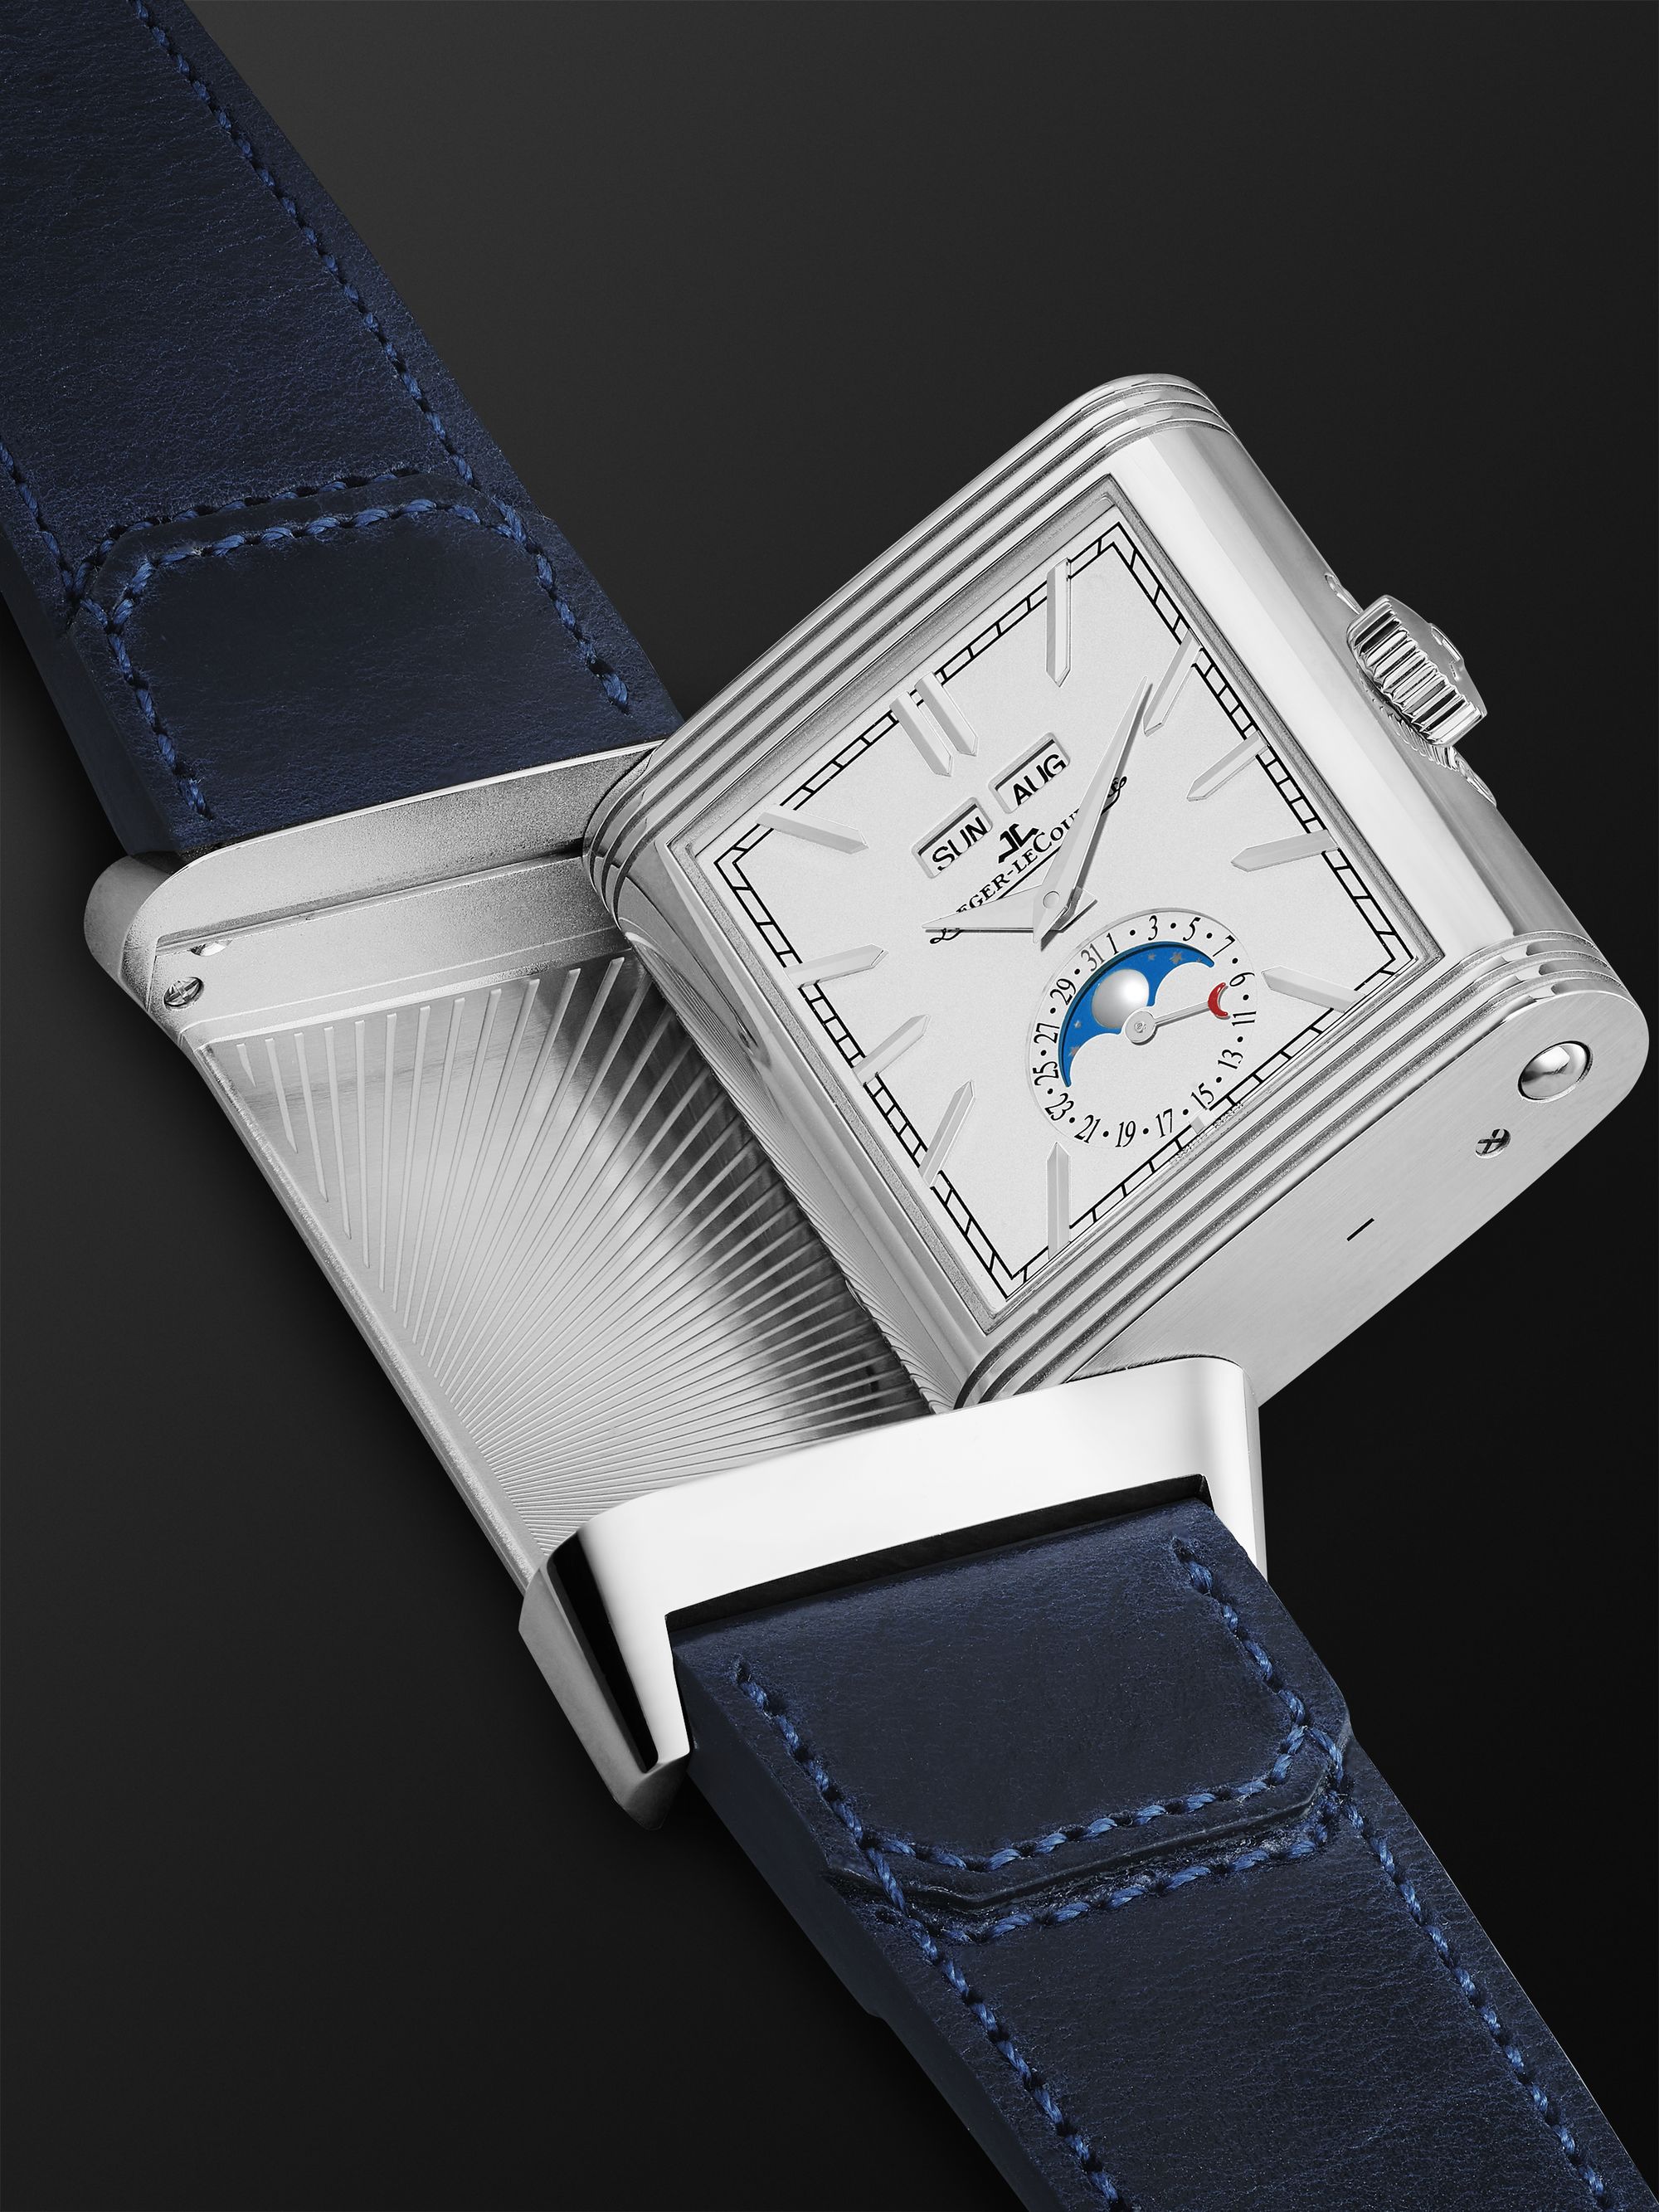 JAEGER-LECOULTRE + Casa Fagliano Reverso Tribute Duoface Calendar 29.9mm Stainless Steel, Leather and Canvas Watch, Ref. No. Q3918420